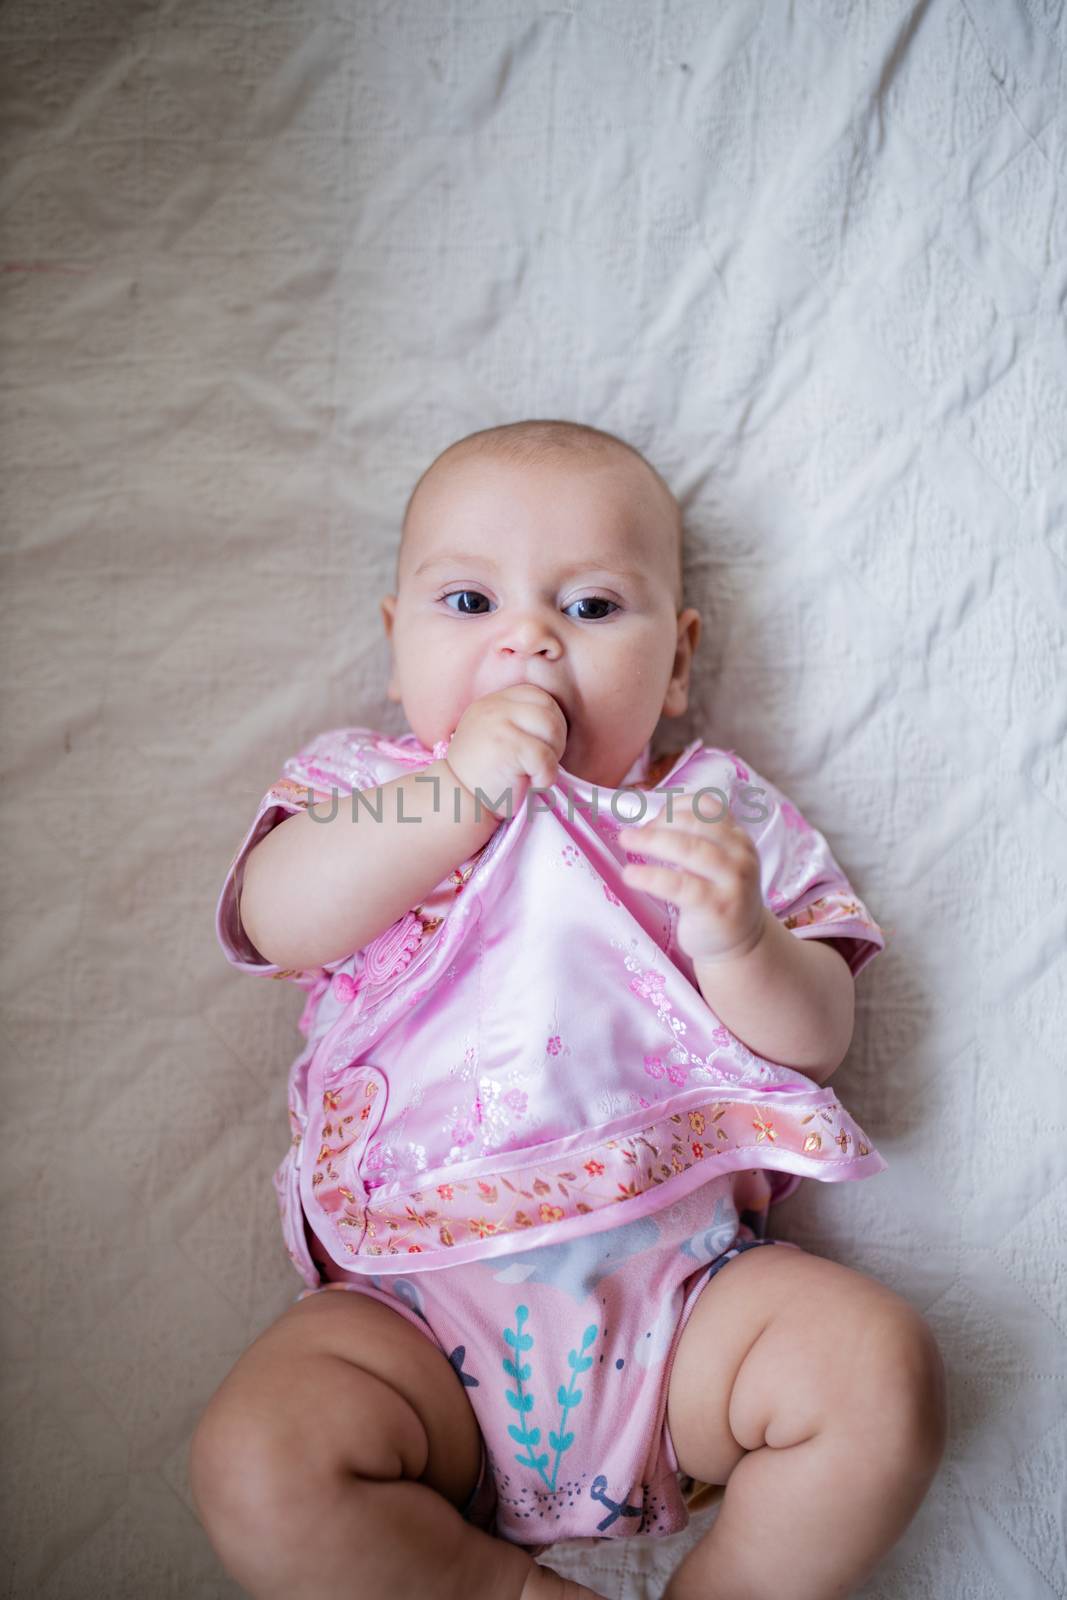 Adorable baby girl from above biting her Asian pink attire and lying down on white bed. Portrait of joyful female baby resting on bed. Happy babies on cradles and beds